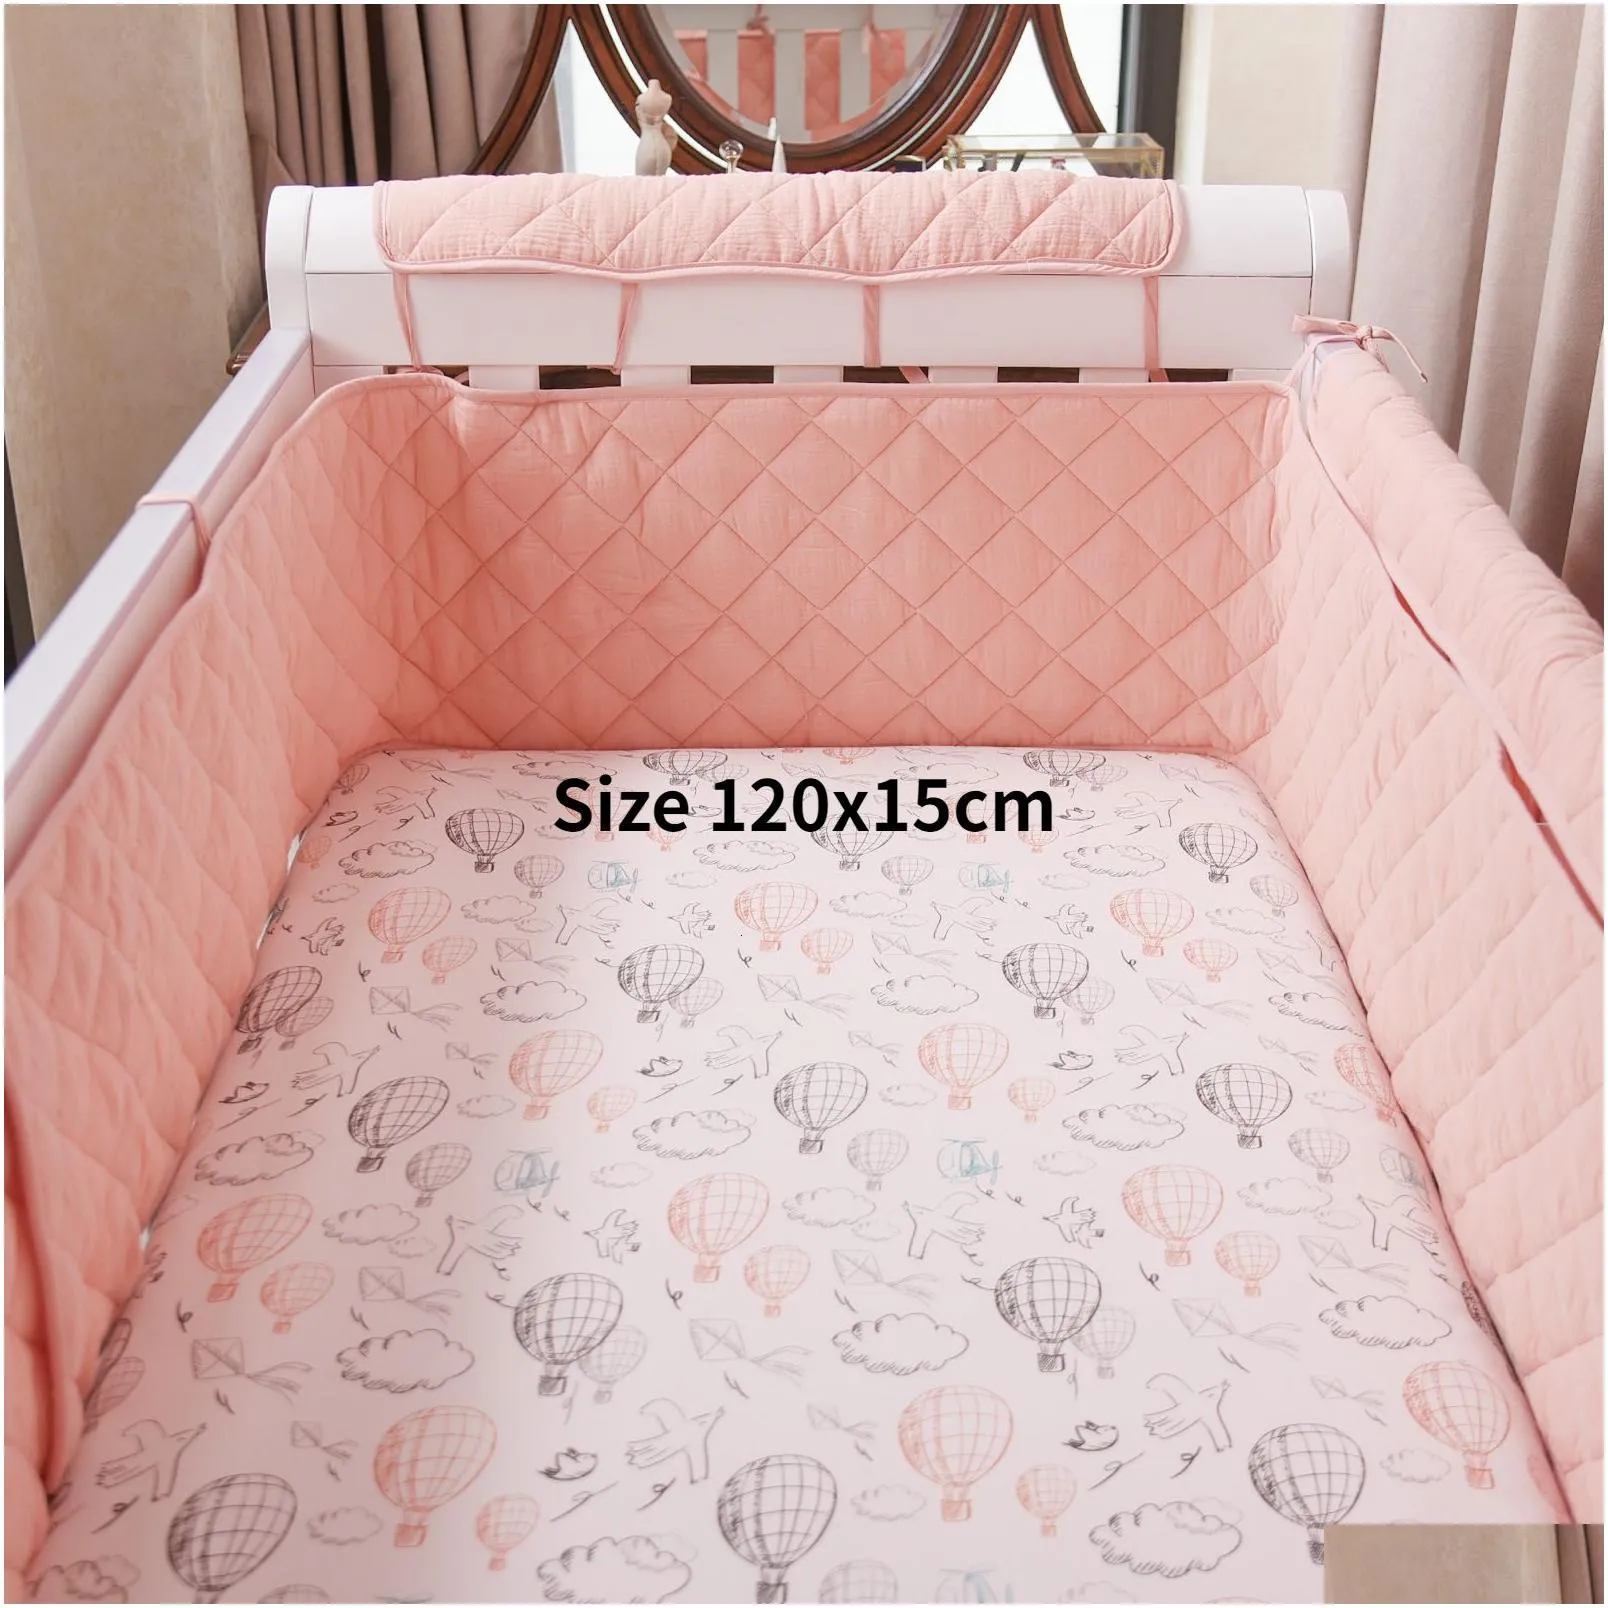 Bed Rails Born Crib Protector Comfortable Playpen Children Childrens Cots Bumpers Boys Padded Safety Baby Accessories 230601 Drop Del Dhfgo